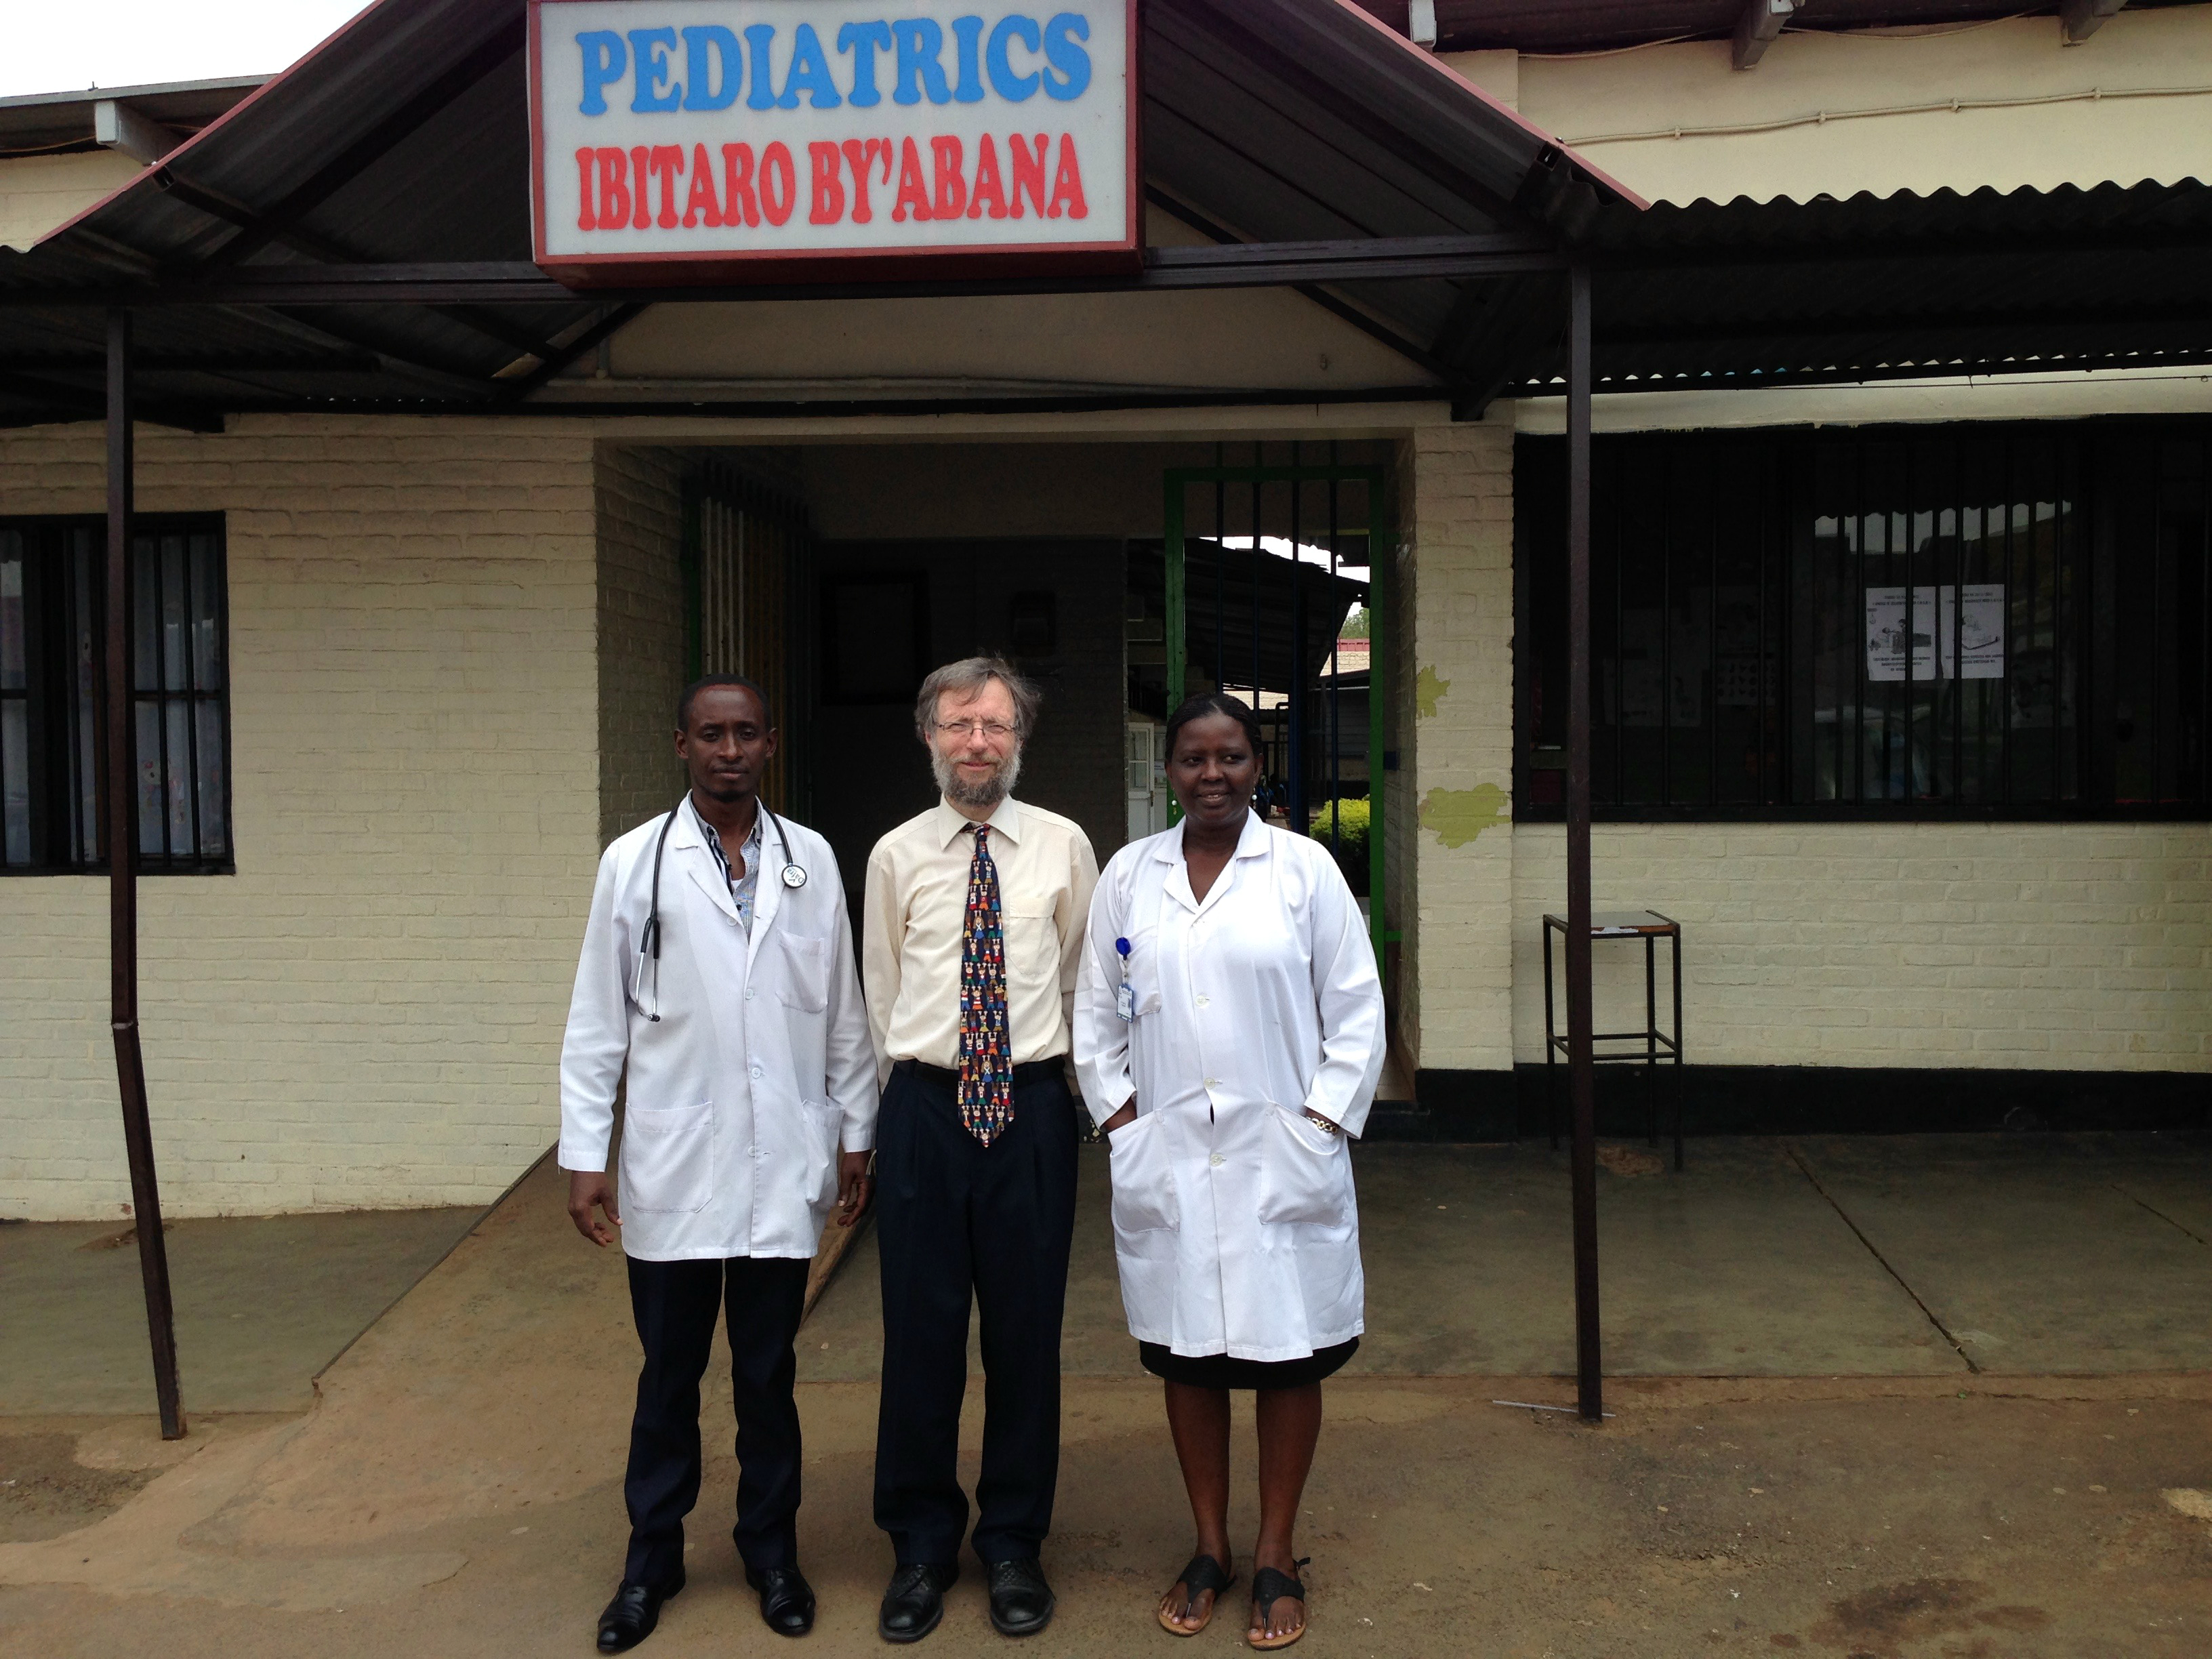 Dr. Martin Bitzan has just returned from Rwanda, where he worked with pediatricians from the Centre Hospitalier Universitaire de Kigali. L. to r. : Dr. Mikael Kalisa, Dr. Bitzan and Dr. Lisine Tuyisenge.